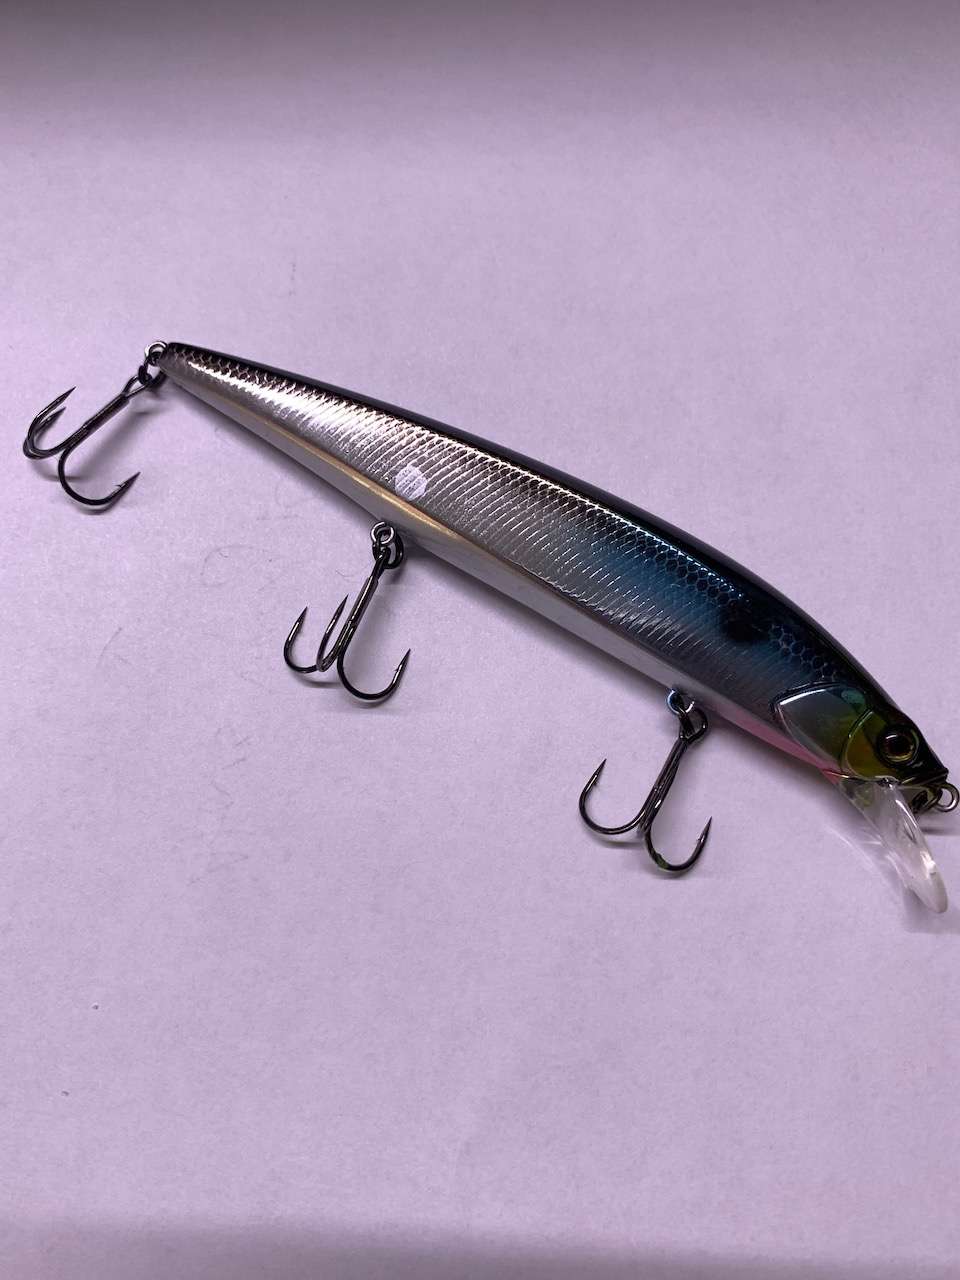 Looking to expand jerkbaits - Fishing Tackle - Bass Fishing Forums